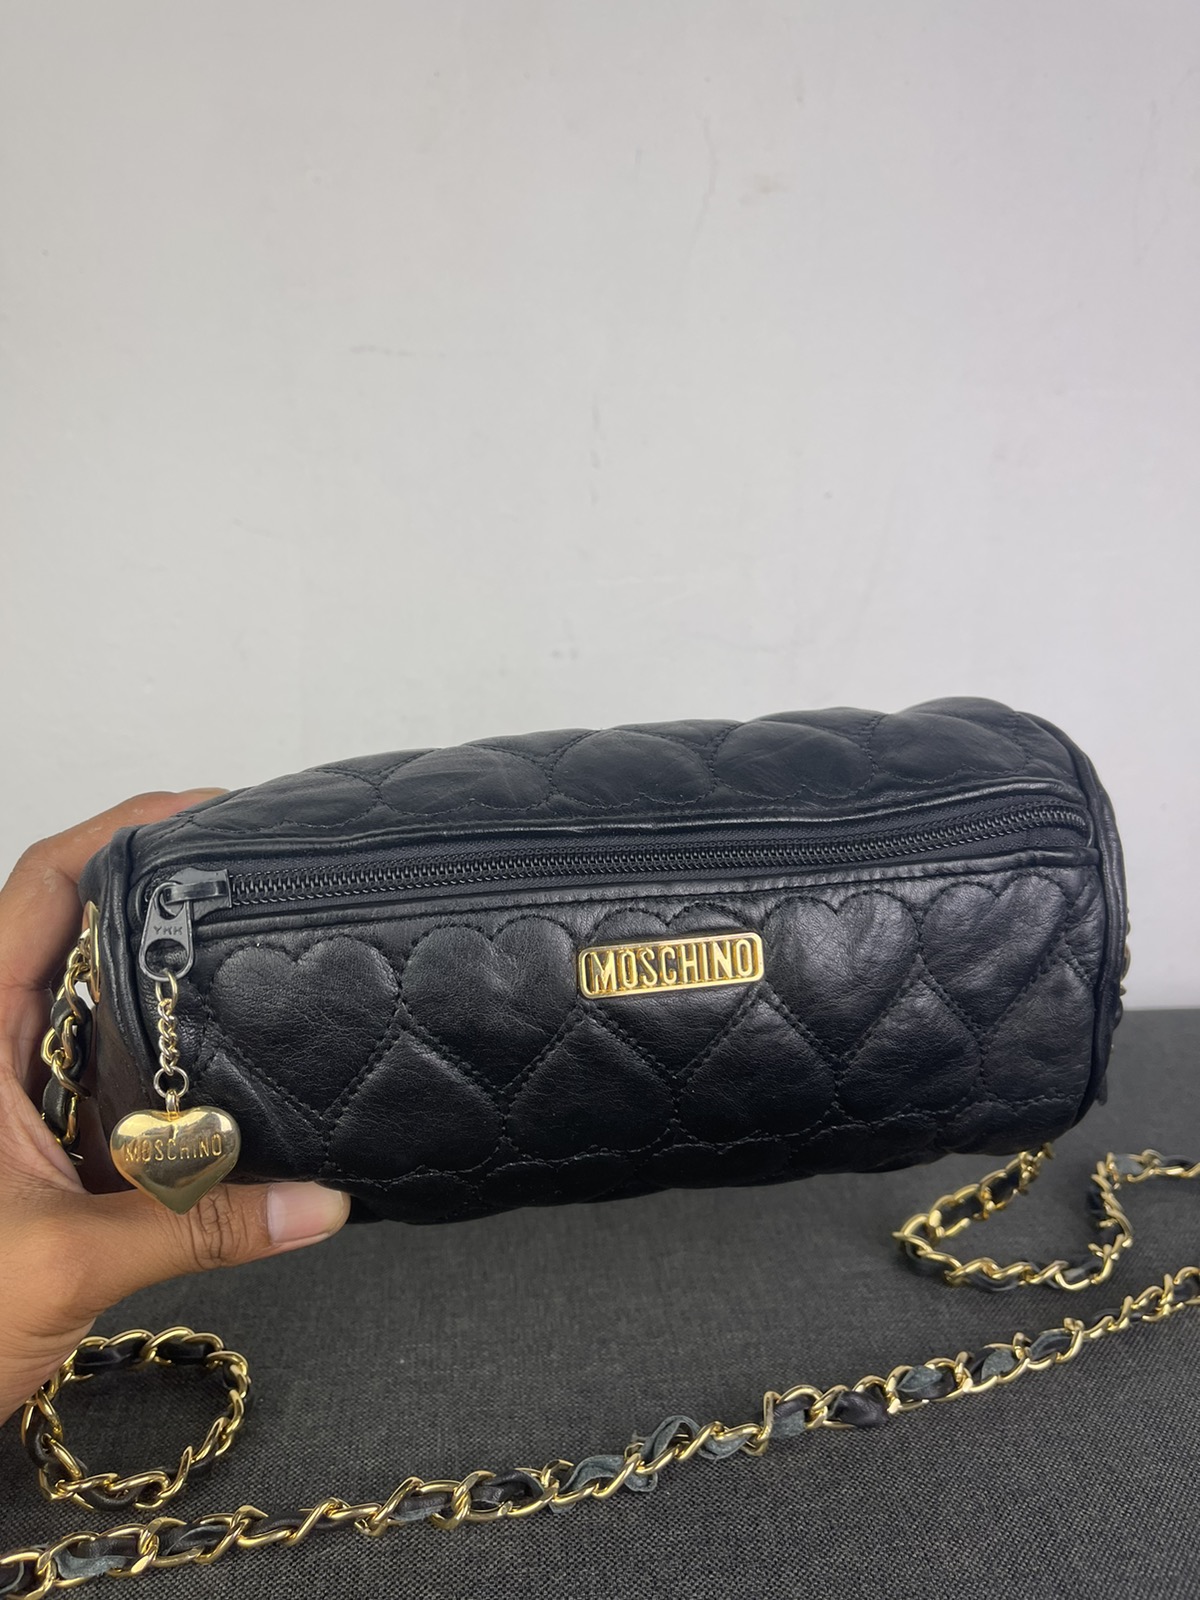 Steals🔥Moschino quilted Cylinder Black crossbody bag - 15